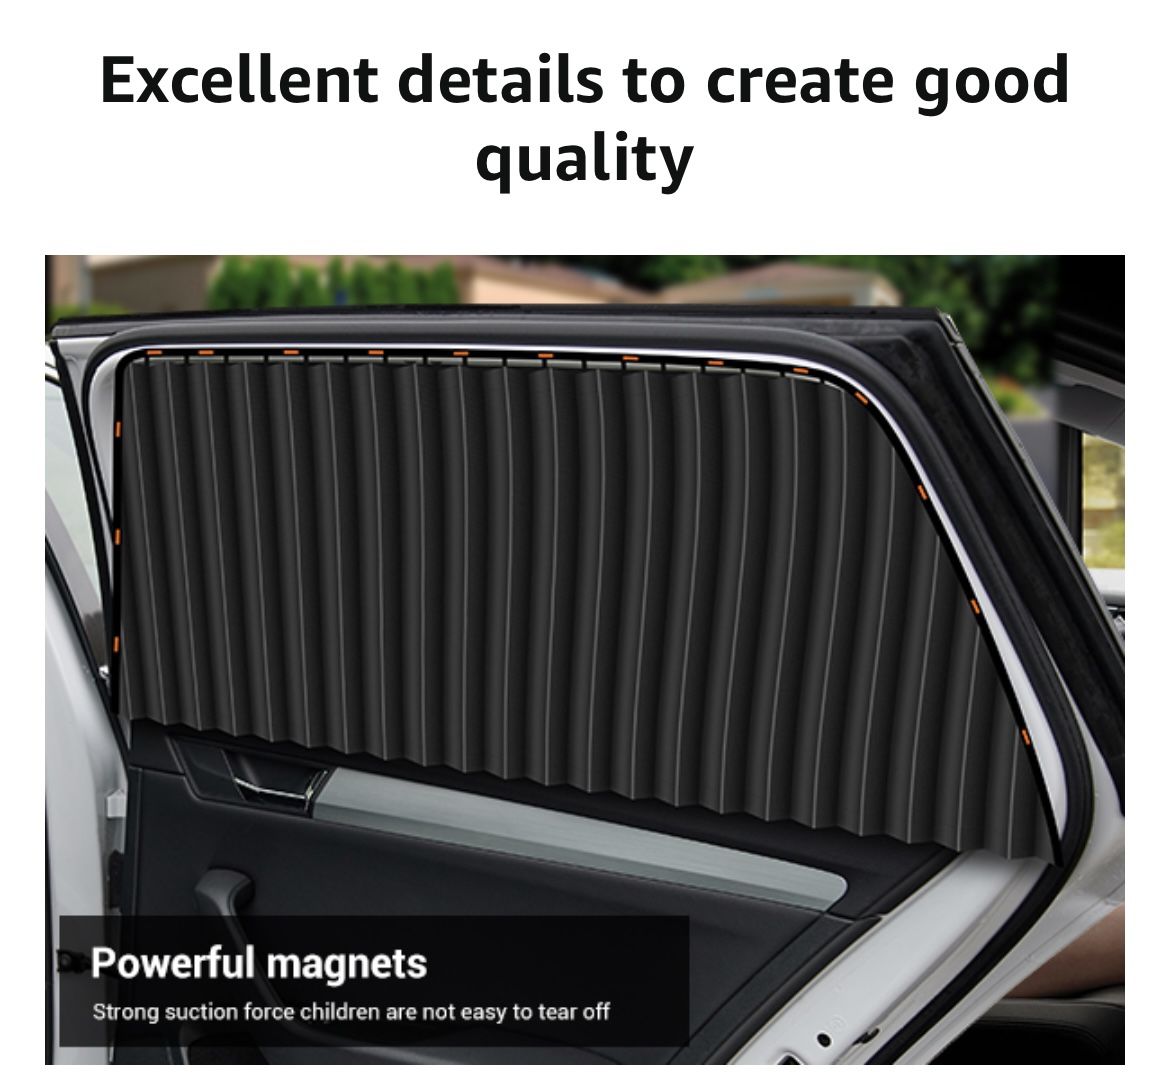 Car Window Shades, 2 Pcs Side Window Sun Shdes Car Privacy Curtains 99% Block Light Magnetic Car Window Covers for Baby Sun Privacy Protection Keep Co